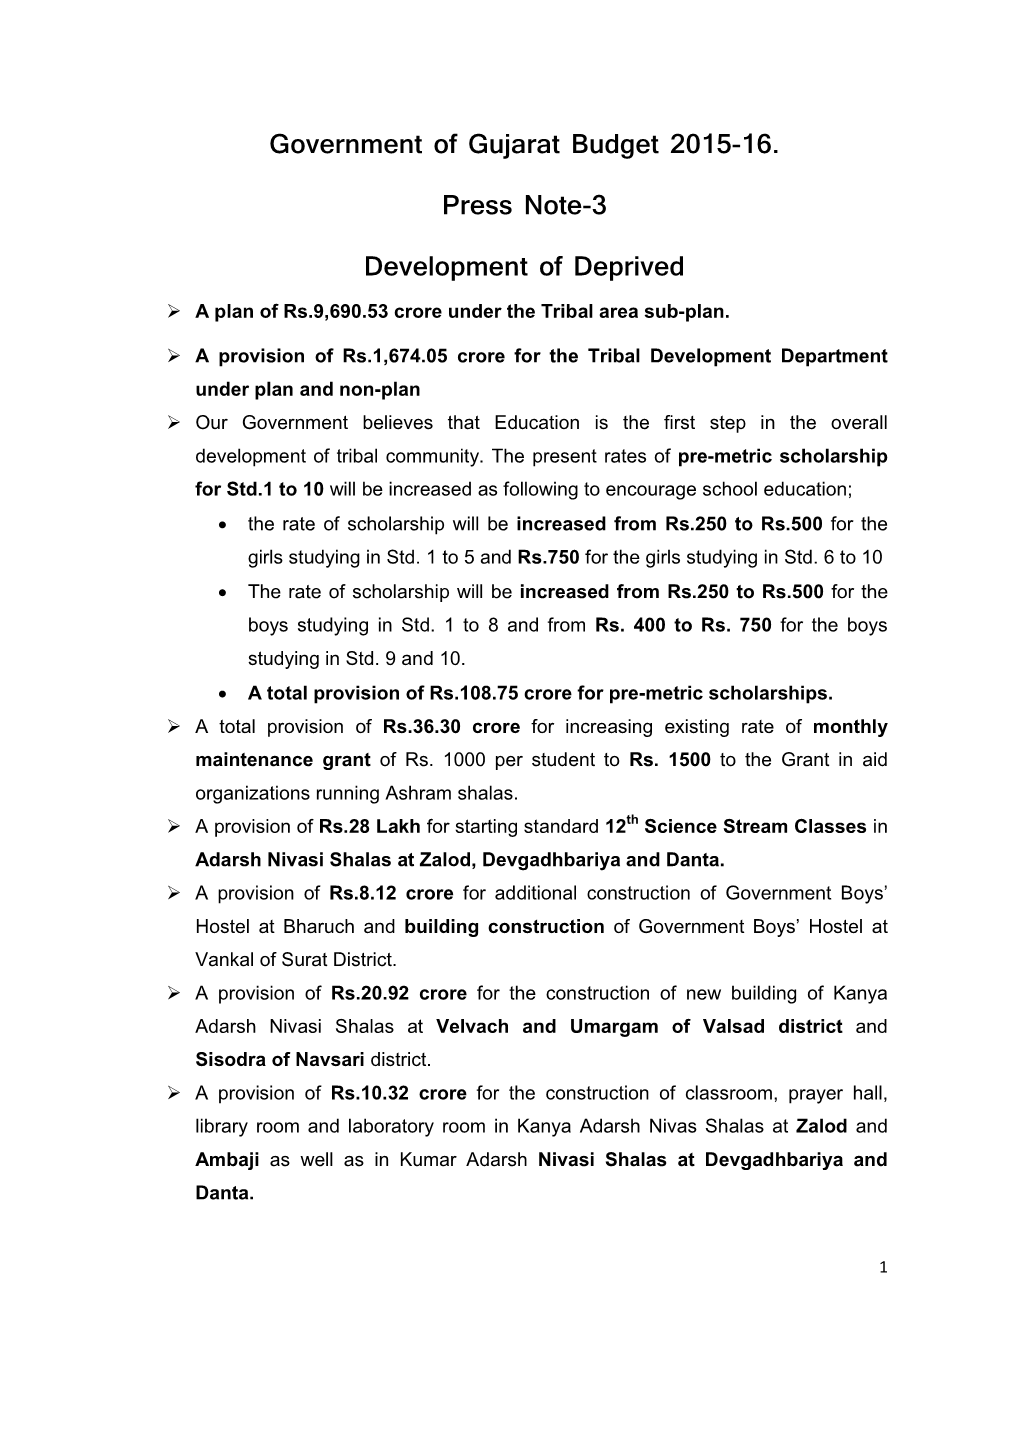 Government of Gujarat Budget 2015-16. Press Note-3